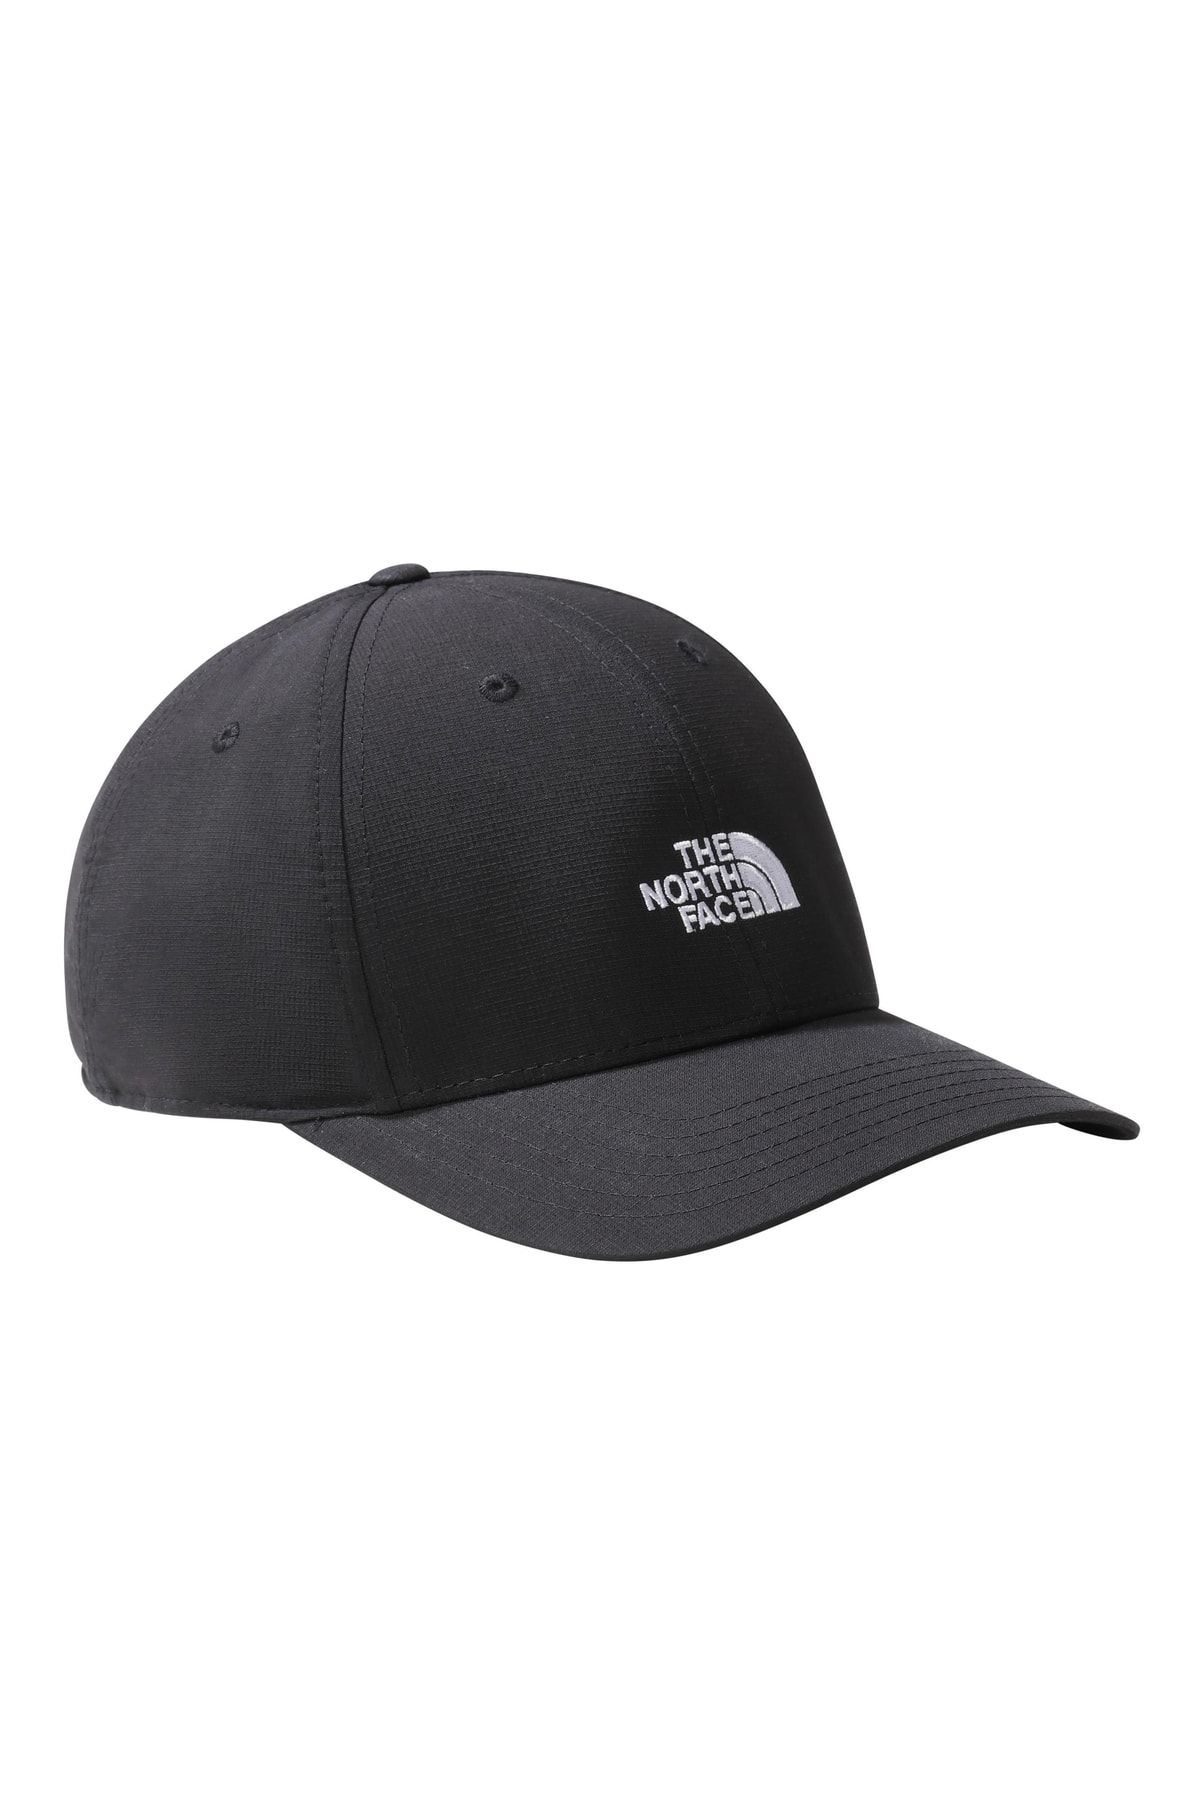 The North Face 66 Tech Hat Nf0a7whcky41